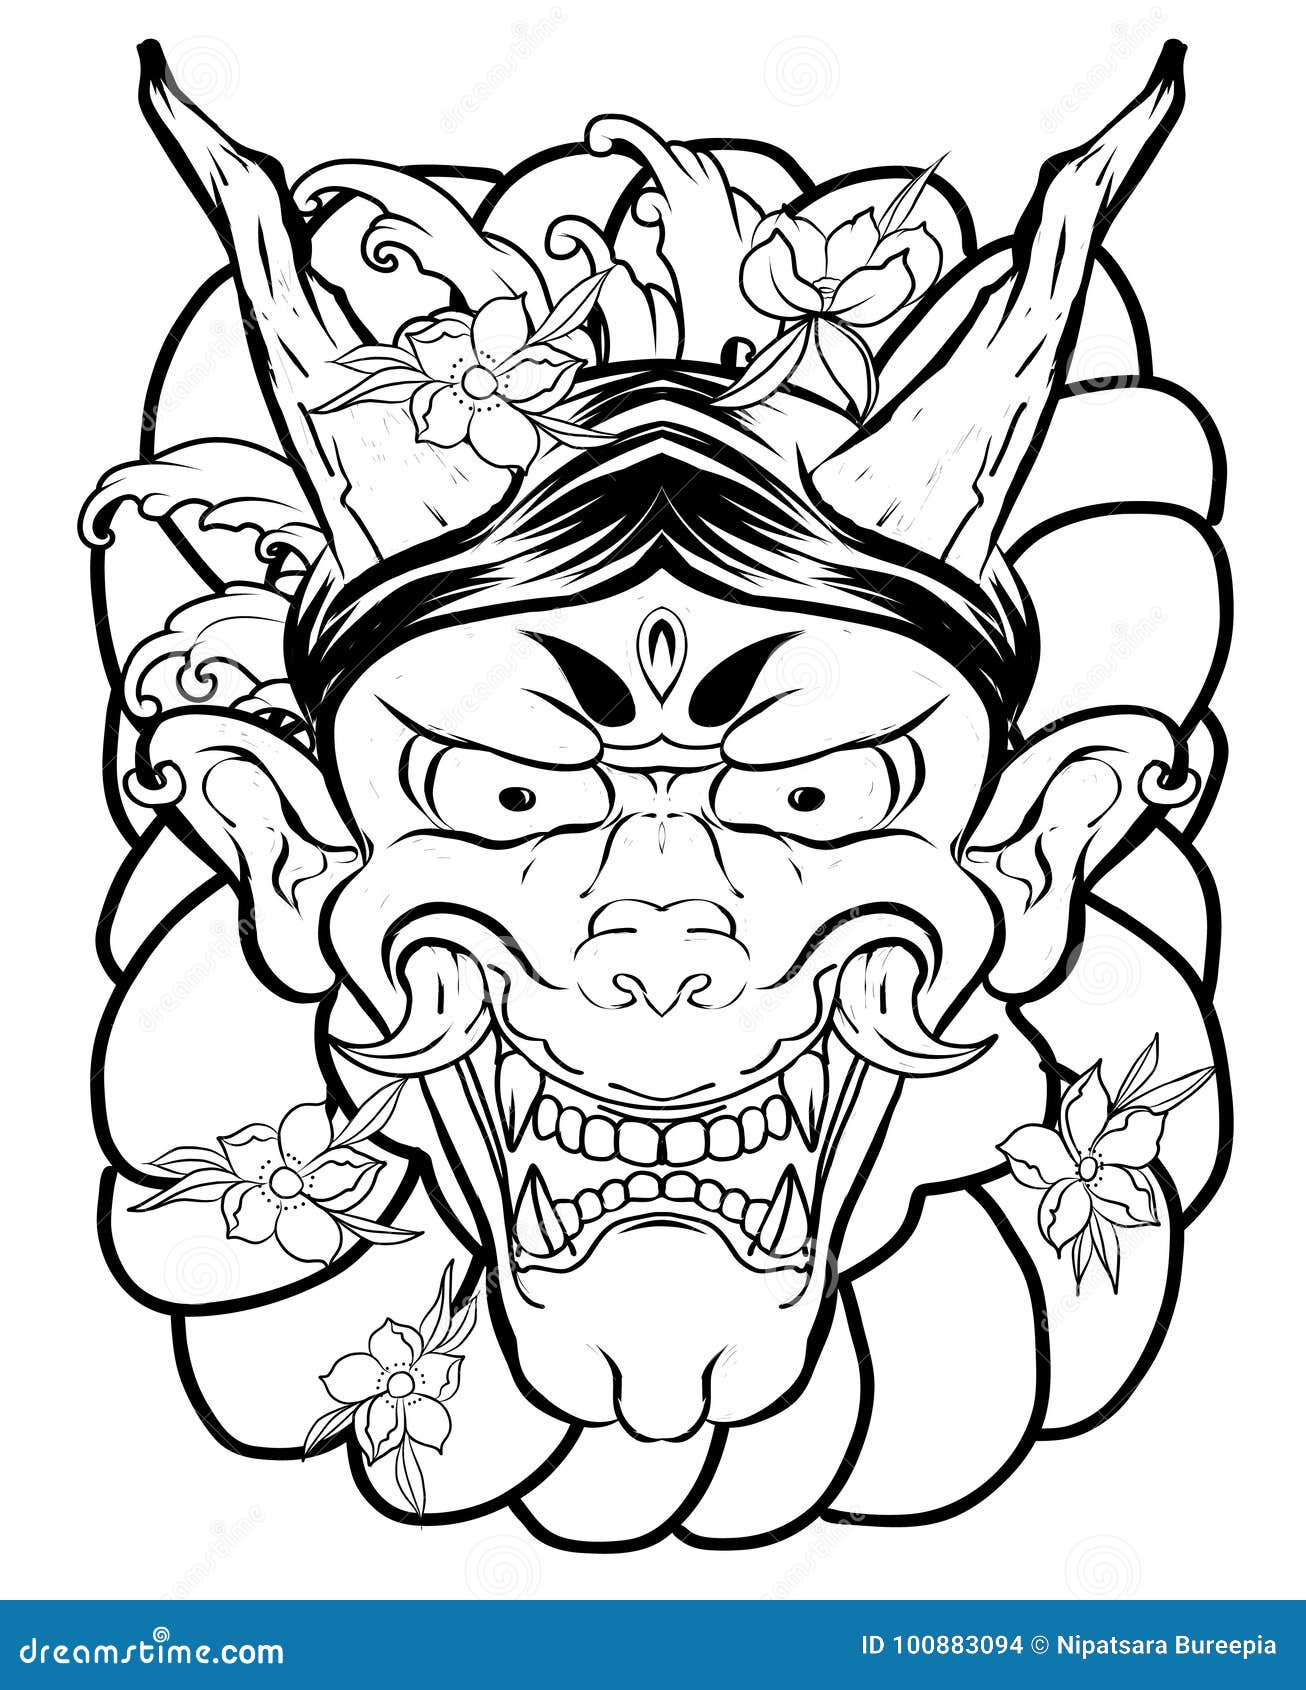 Japanese Demon Mask Tattoo for Arm.hand Drawn Oni Mask with Cherry and Peony Flower.Japanese Demon Mask on Wave and Sakura Stock Vector - Illustration of fantasy, hannya: 100883094